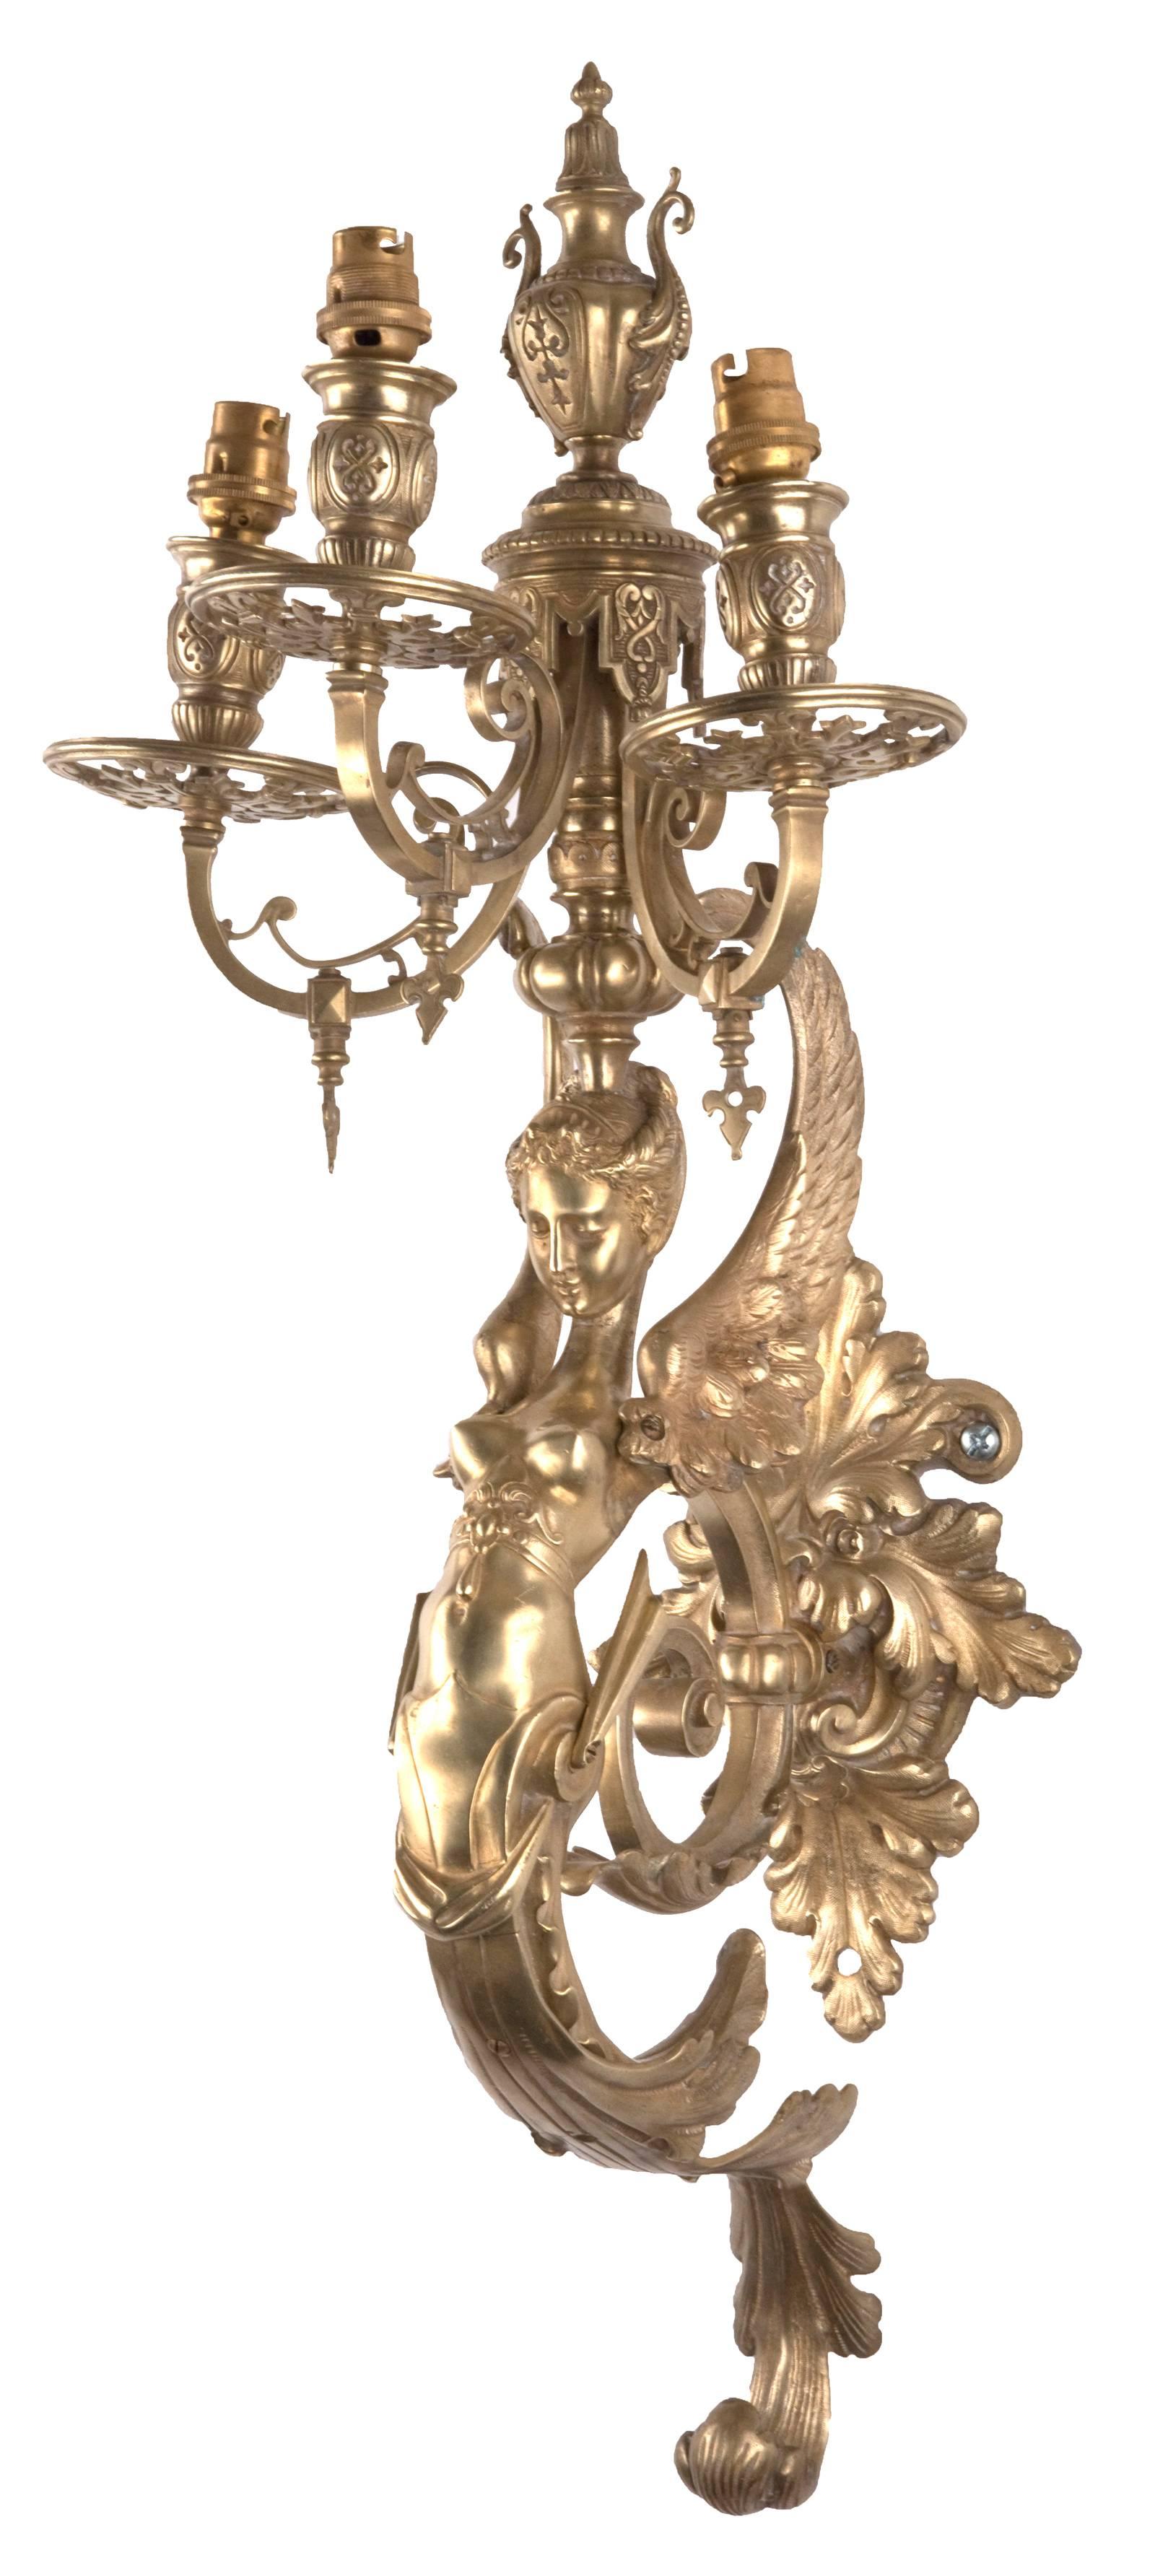 A pair of 19th century hand chased and finely detailed ormolu three-light wall sconces supported by cast, winged caryatids of elongated form, which terminates in stylized filigree.